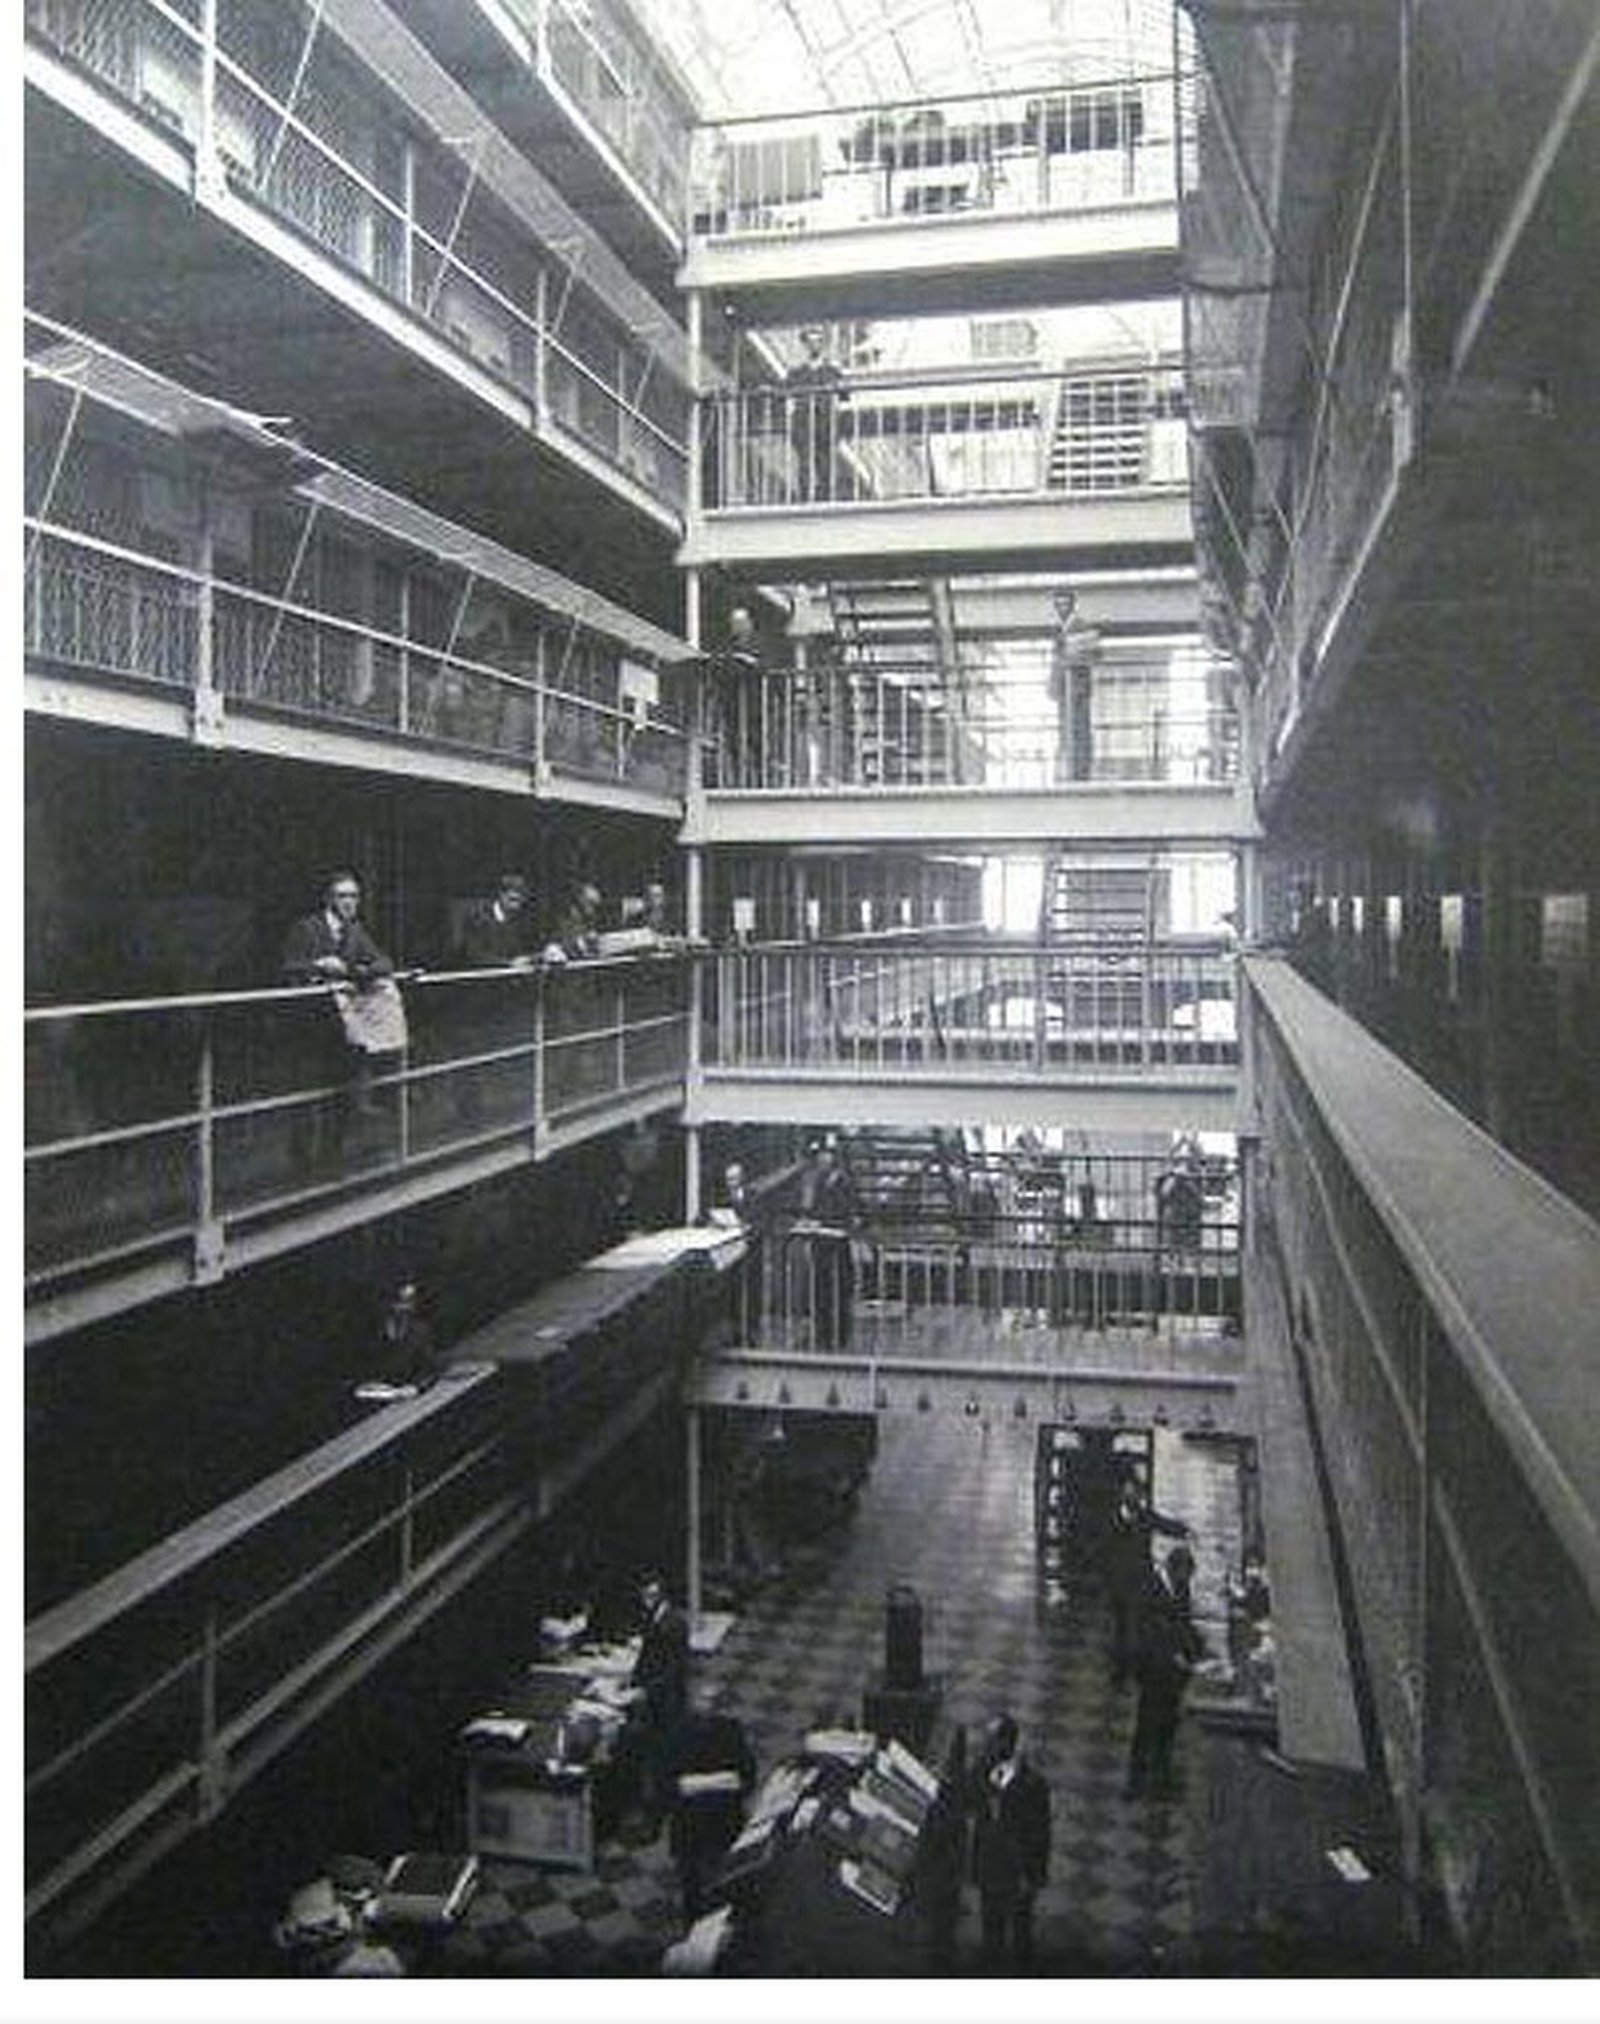 Image - The Public Record Office, 1921: world-class archive storage and retrieval (Credit: The National Archives)